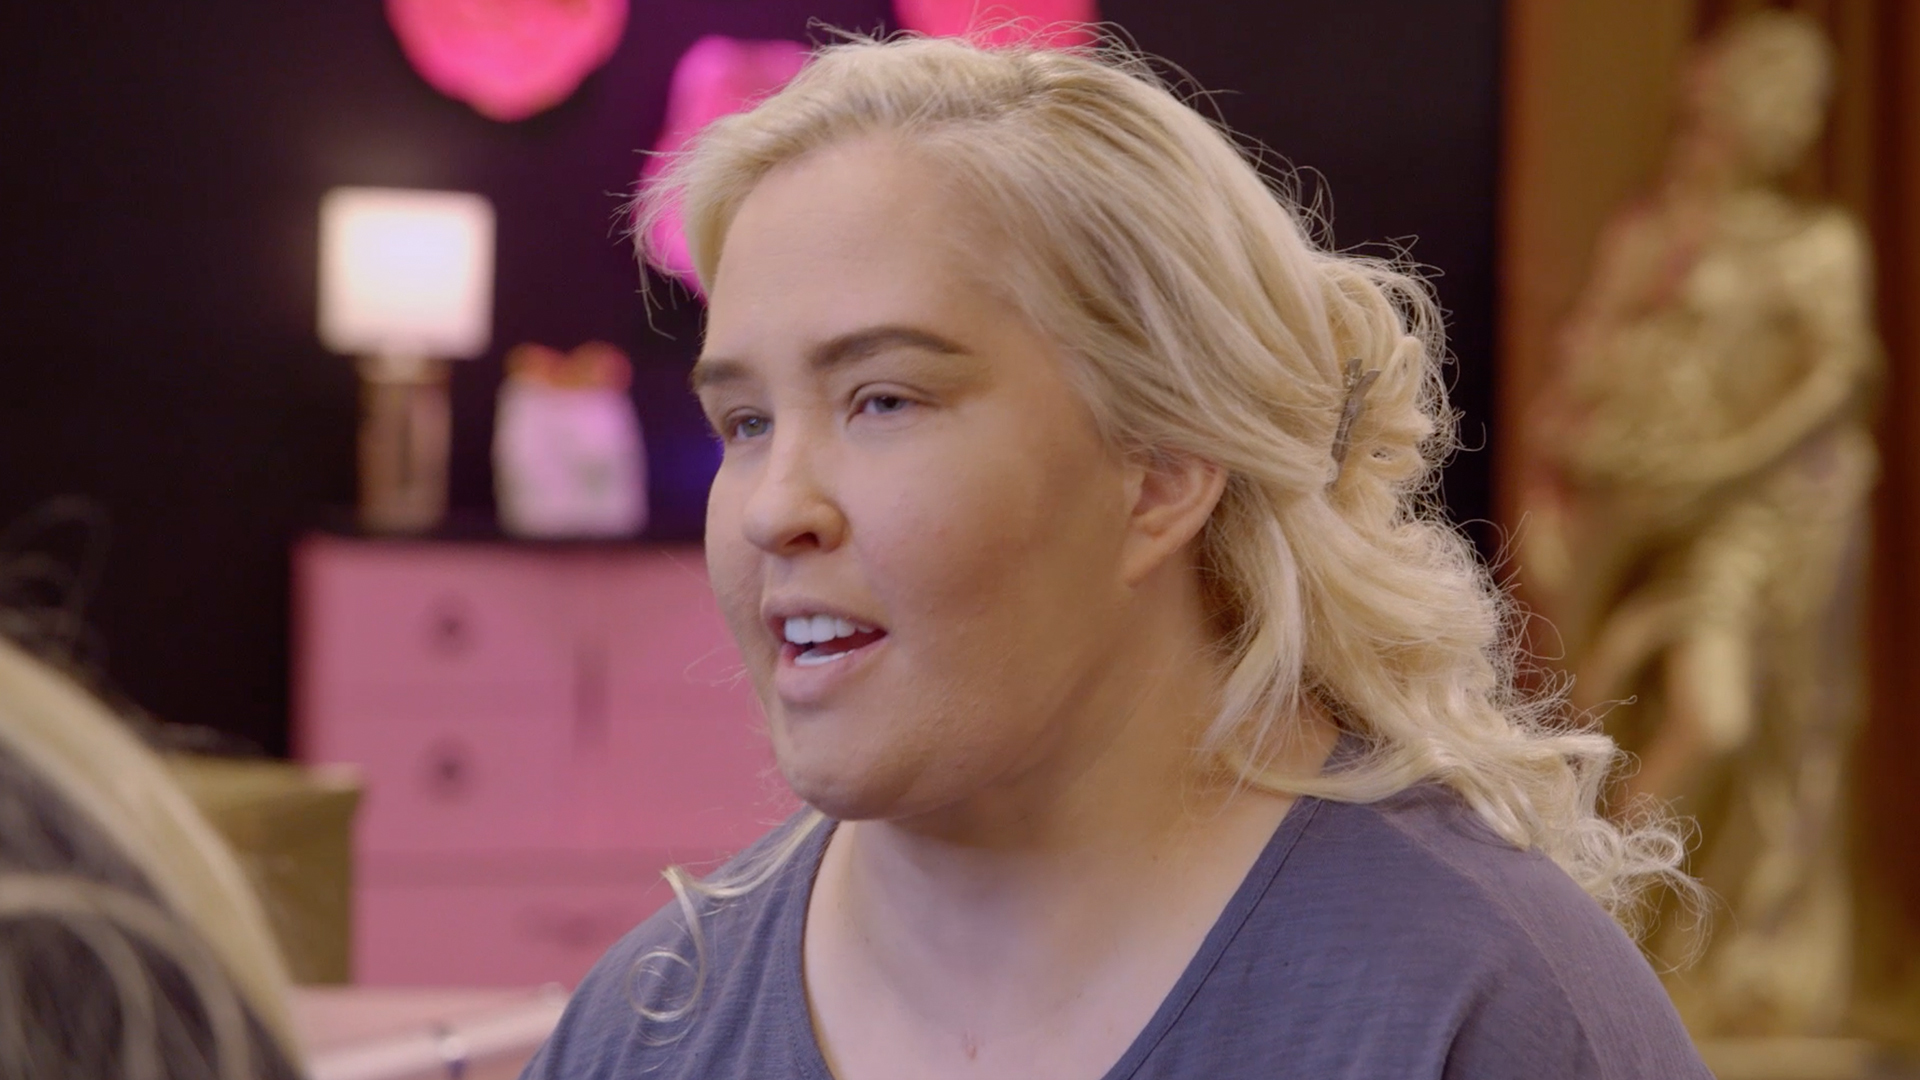 Watch Mama June’s Weight Loss Journey | Mama June: From Not to Hot Video Extras